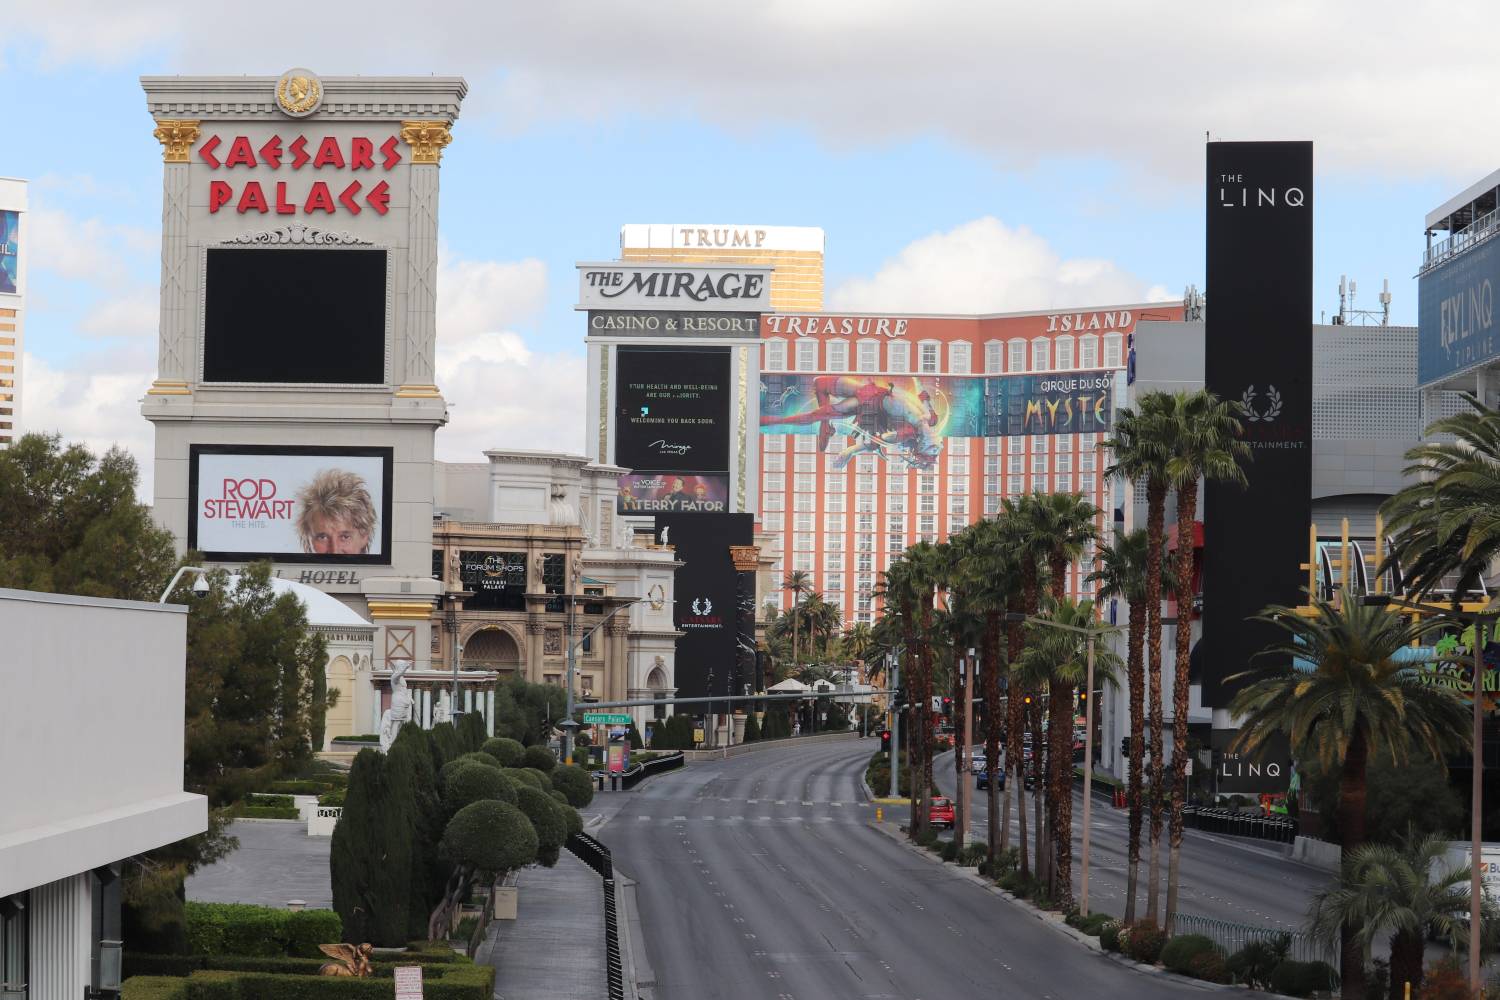 After the statewide shutdown of Nevada casinos to stem the spread of COVID-19, the Las Vegas Strip sat empty on March 20, 2020.Las Vegas Strip during COVID-19